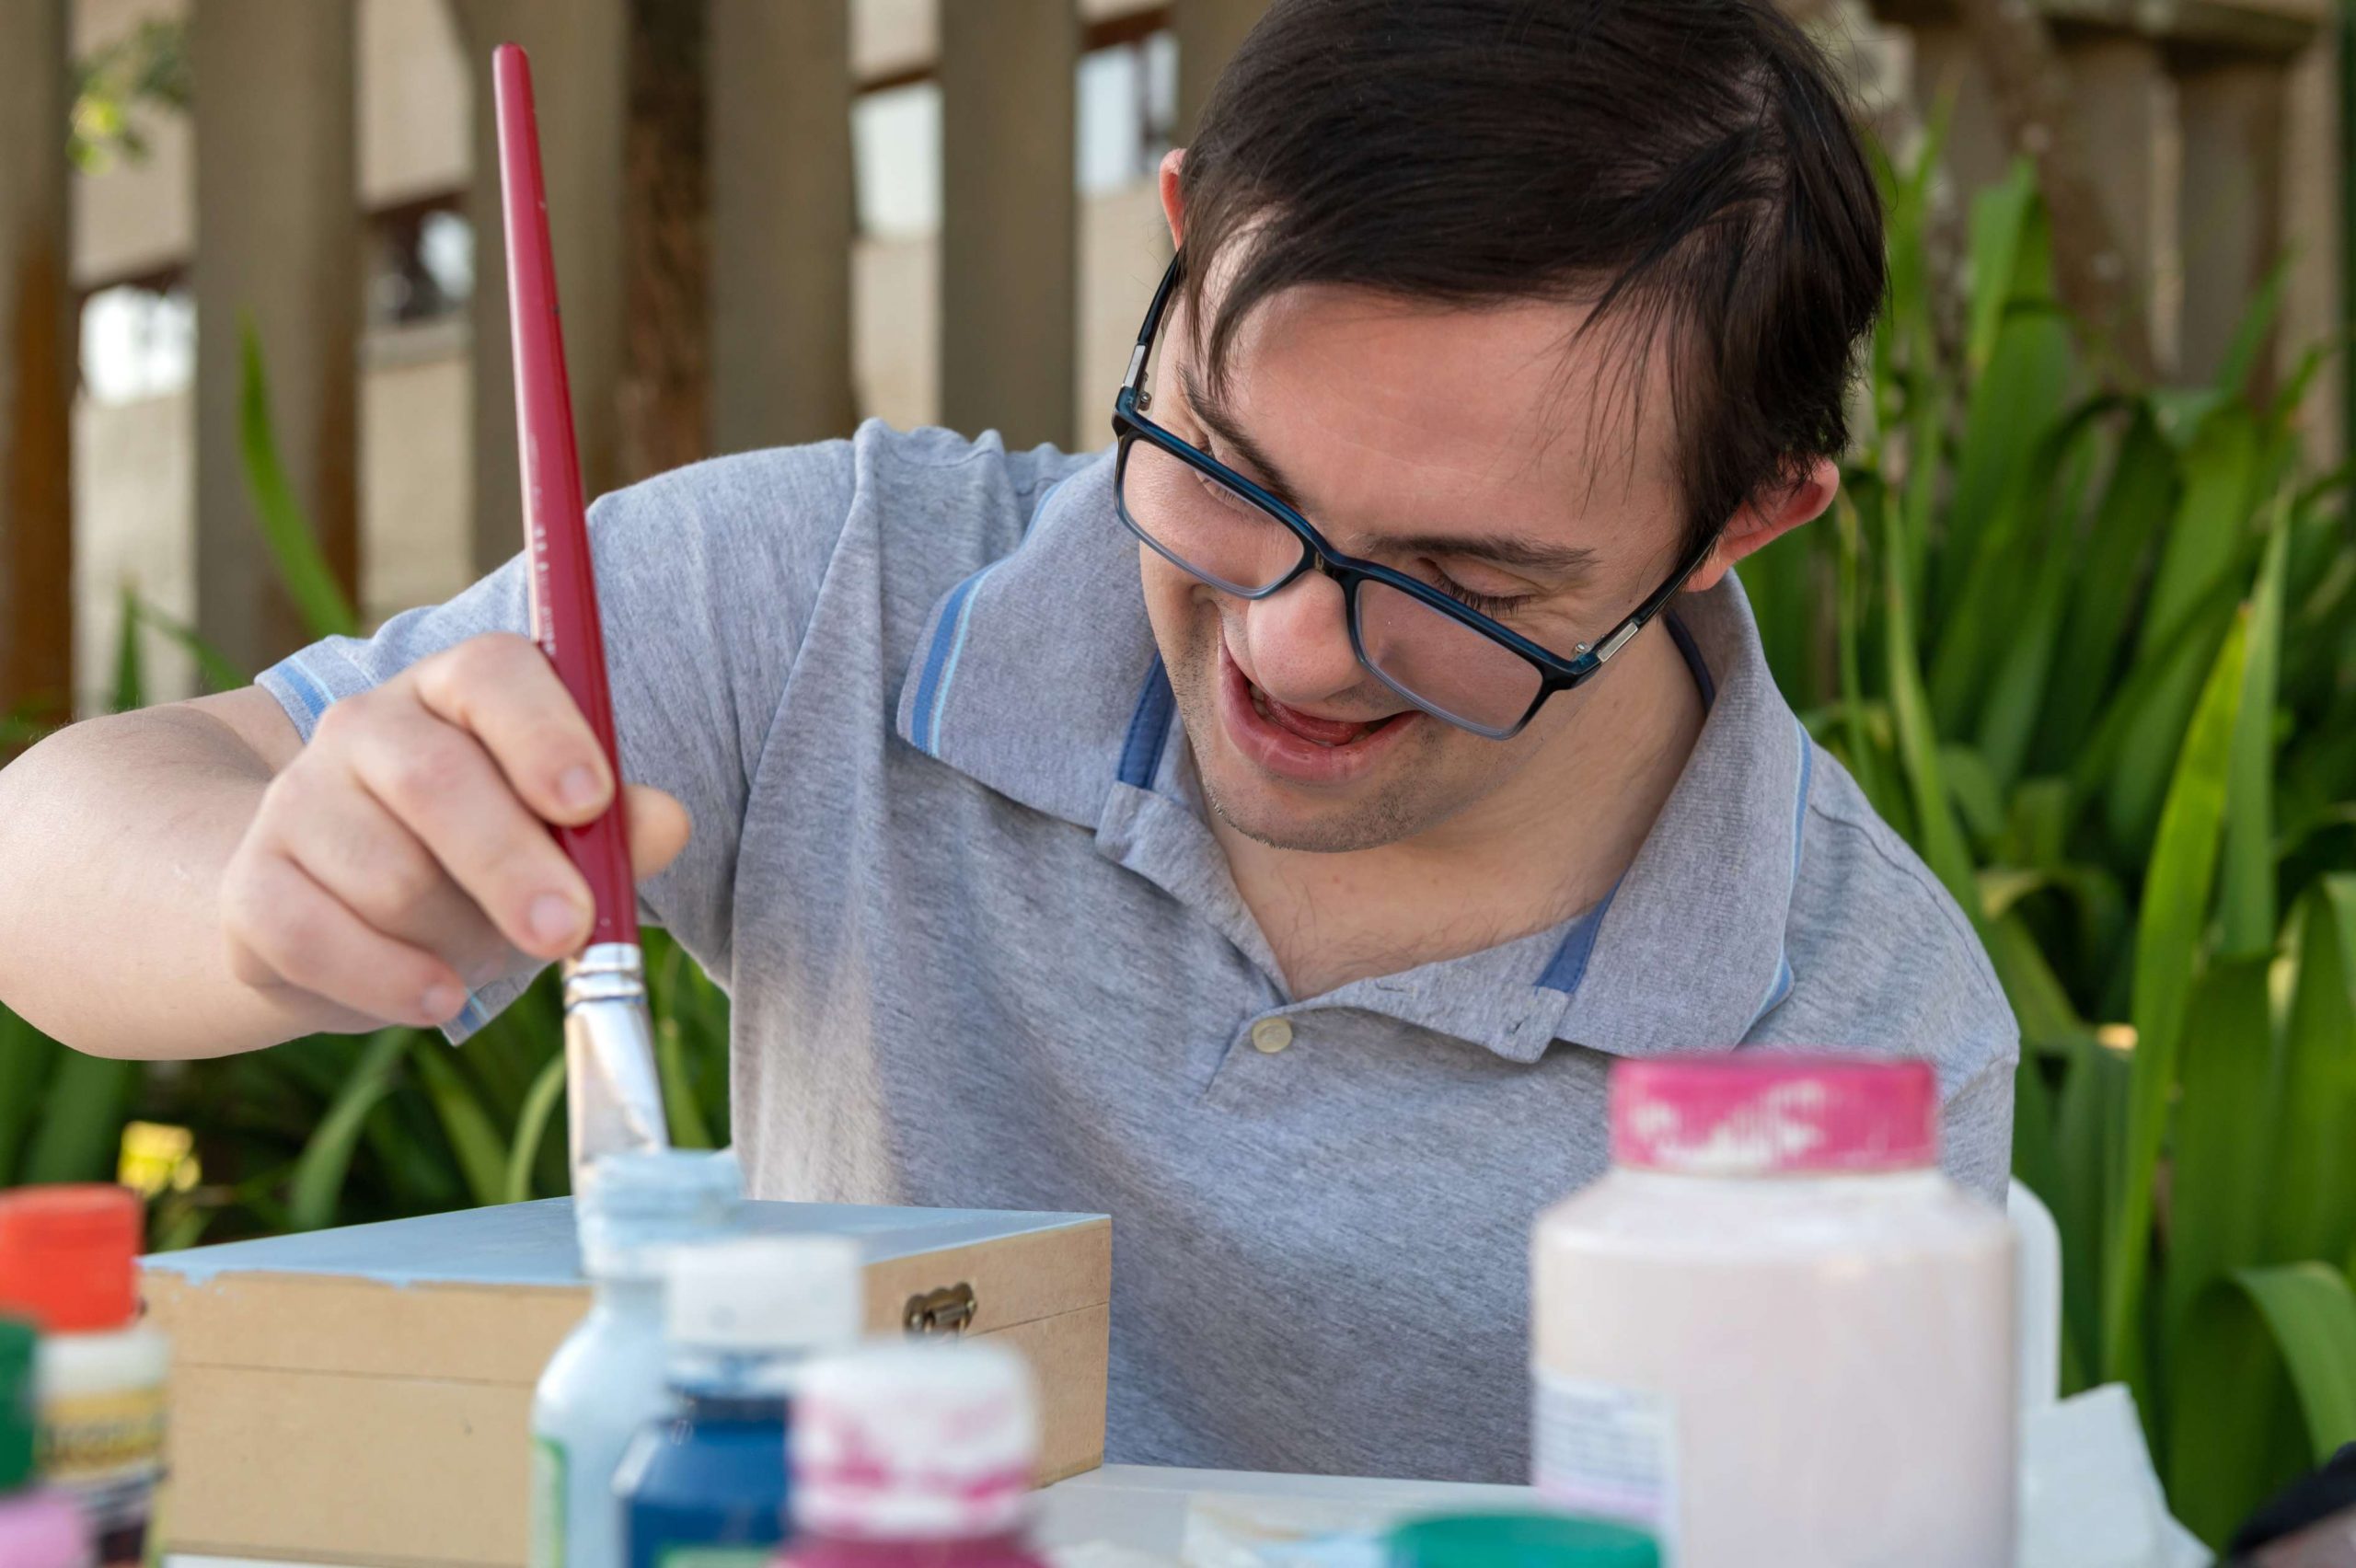 Man with disability painting a craft project